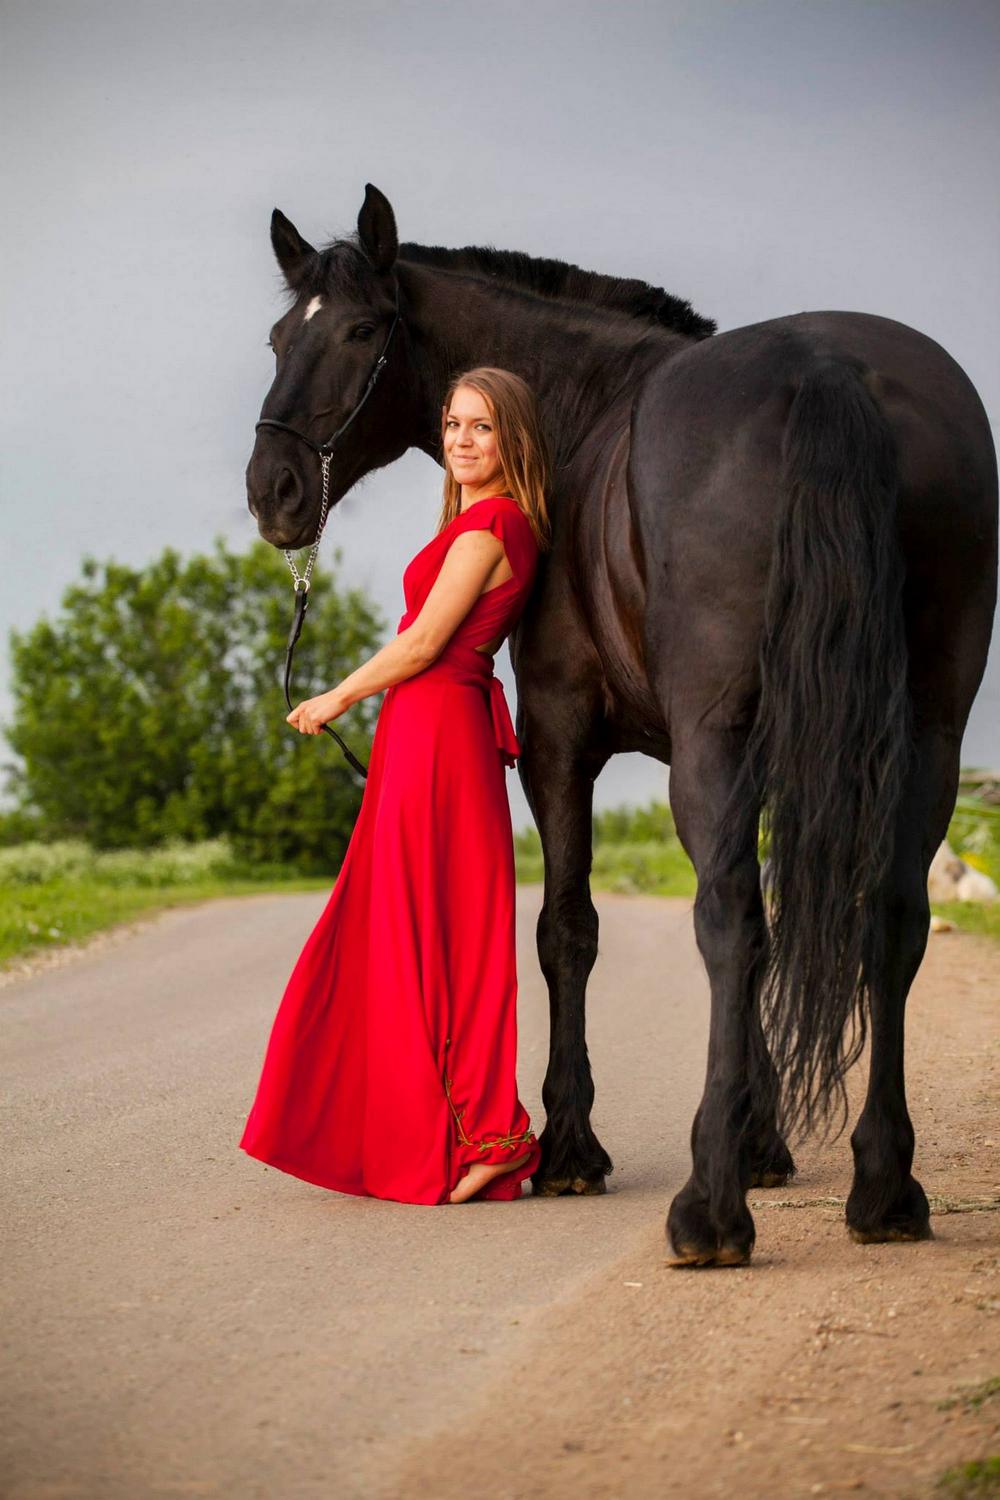 Photo shooting in the Vesuvius National Park with beautiful girl with red dress and black horse